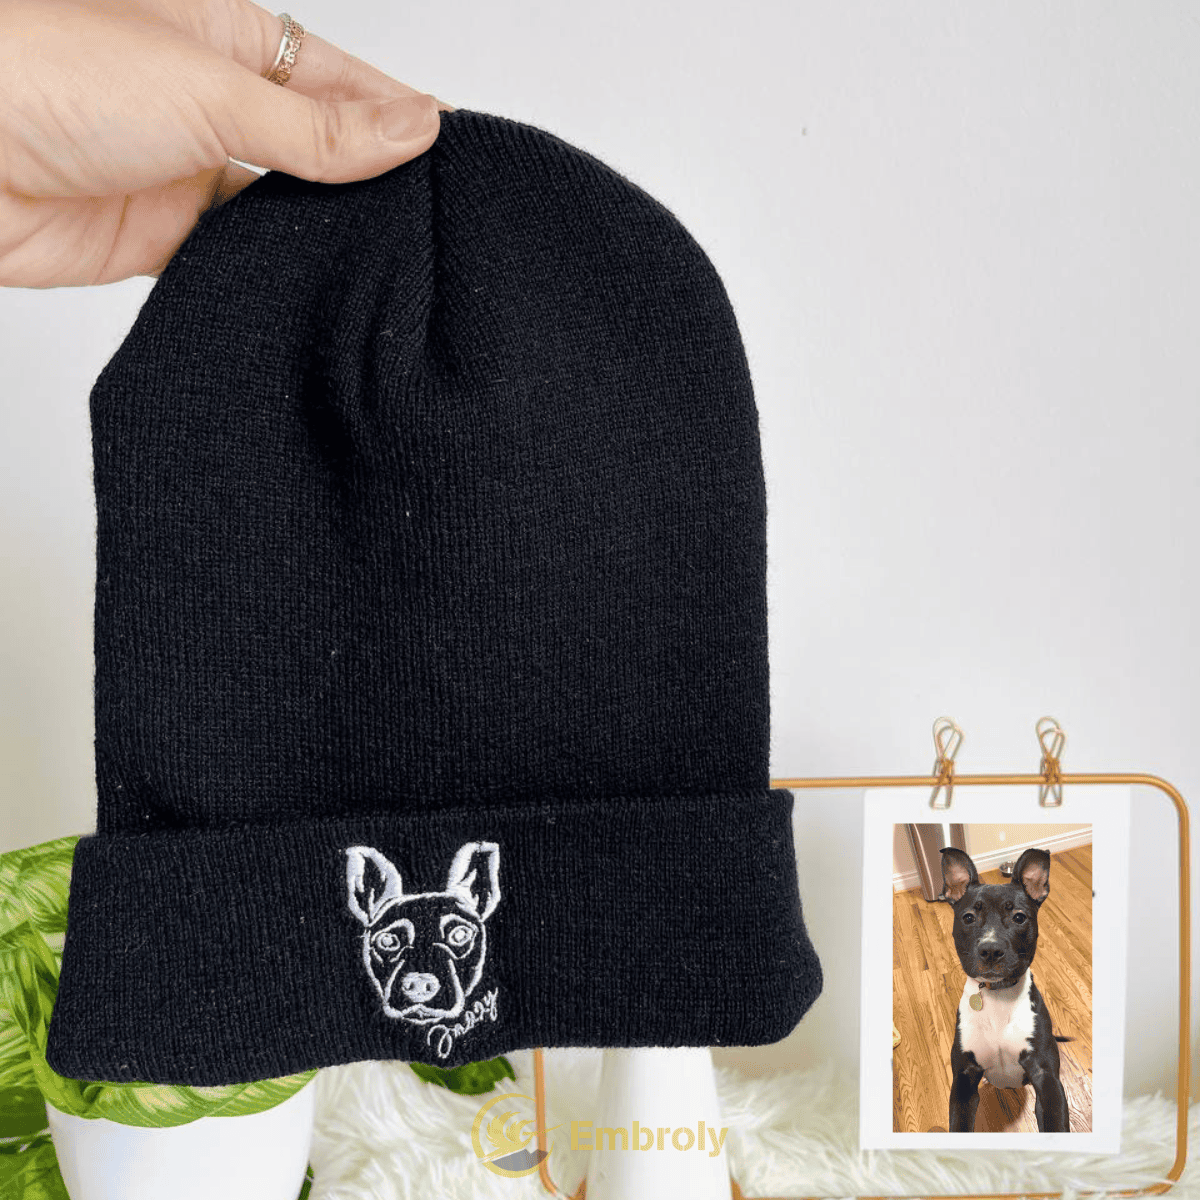 Personalized Embroidered Pet Outline From Photo On Beanie, Customized With Pet Name On Side Or Under Photo